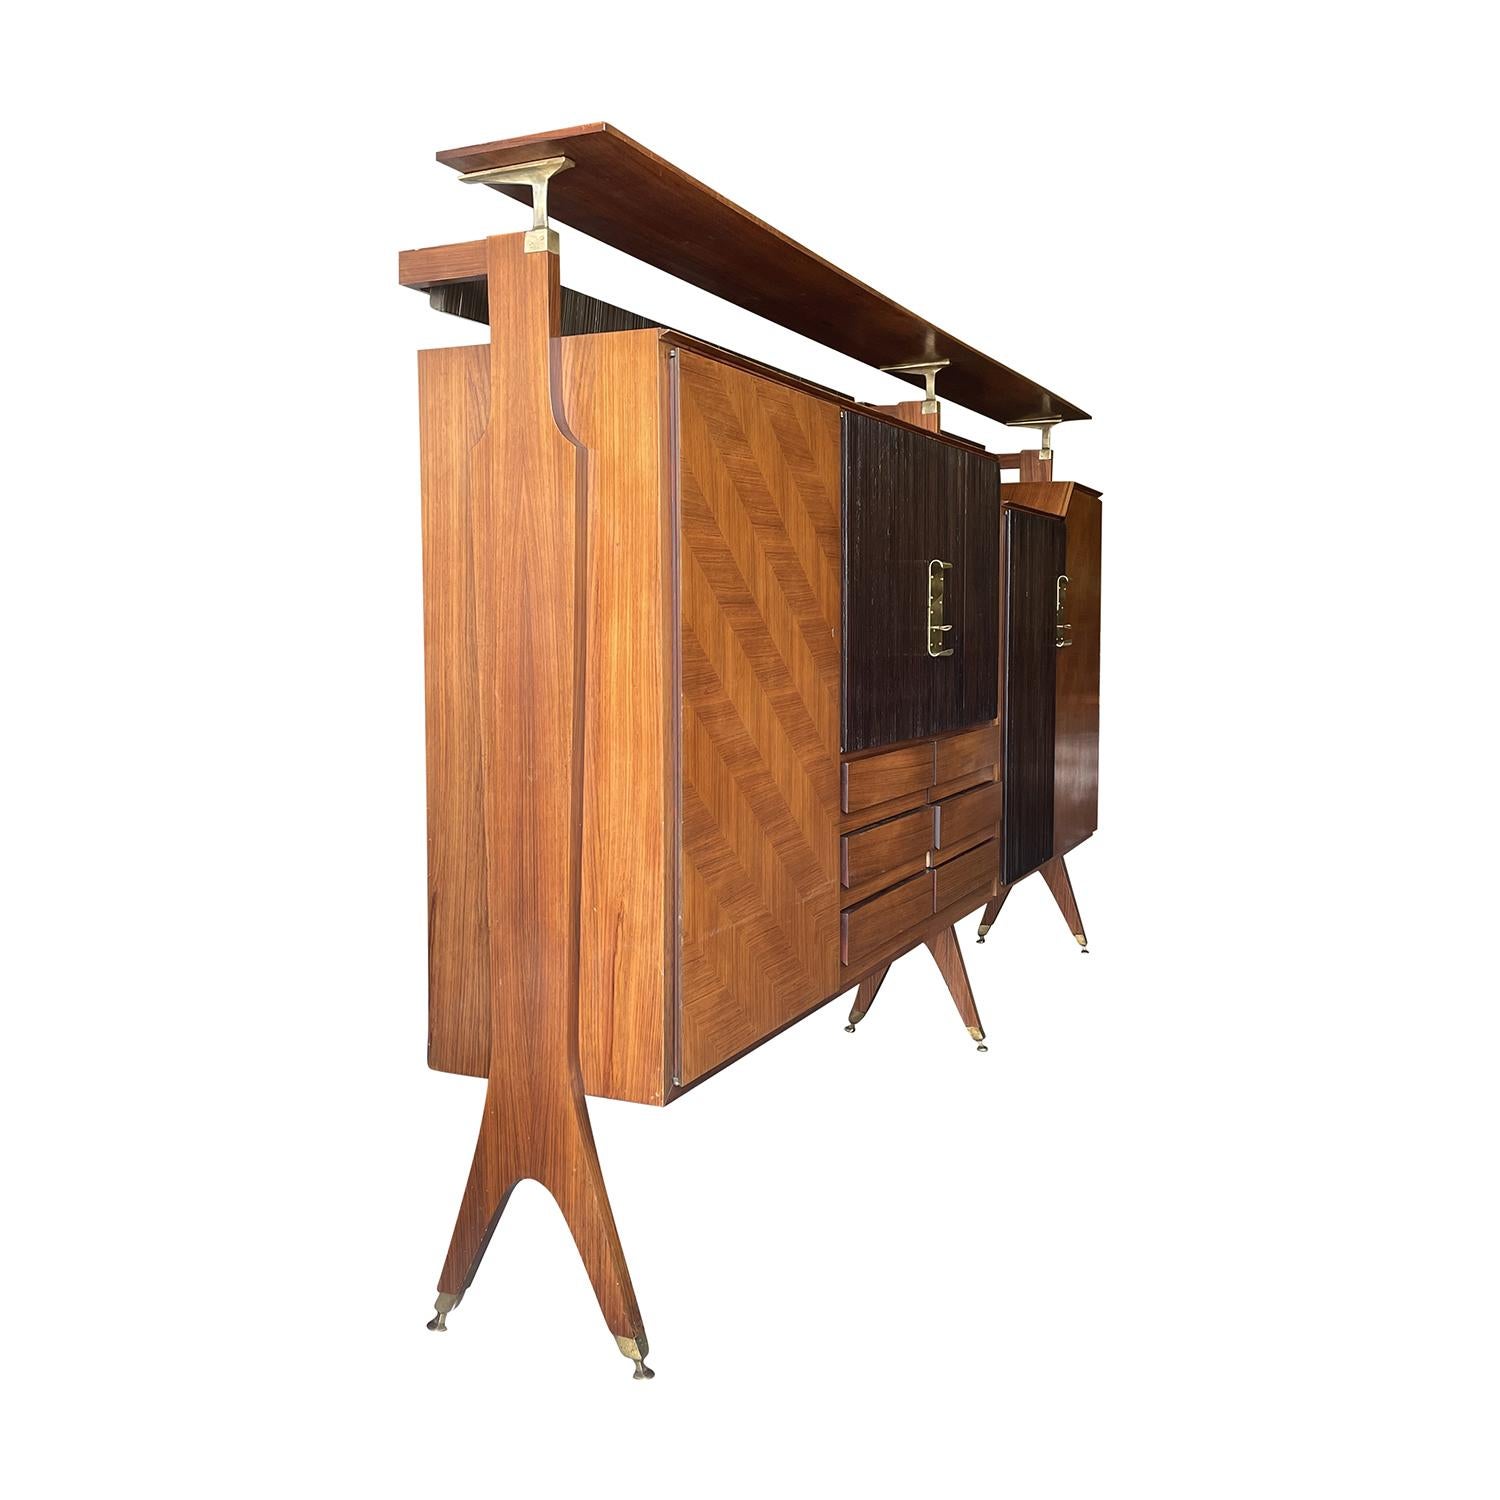 A vintage Mid-Century modern Italian two-part cocktail bar cabinet with an elevated top made of hand crafted polished Rosewood and Walnut, designed by Osvaldo Borsani in good condition. The tall freestanding credenza is composed with six drawers and